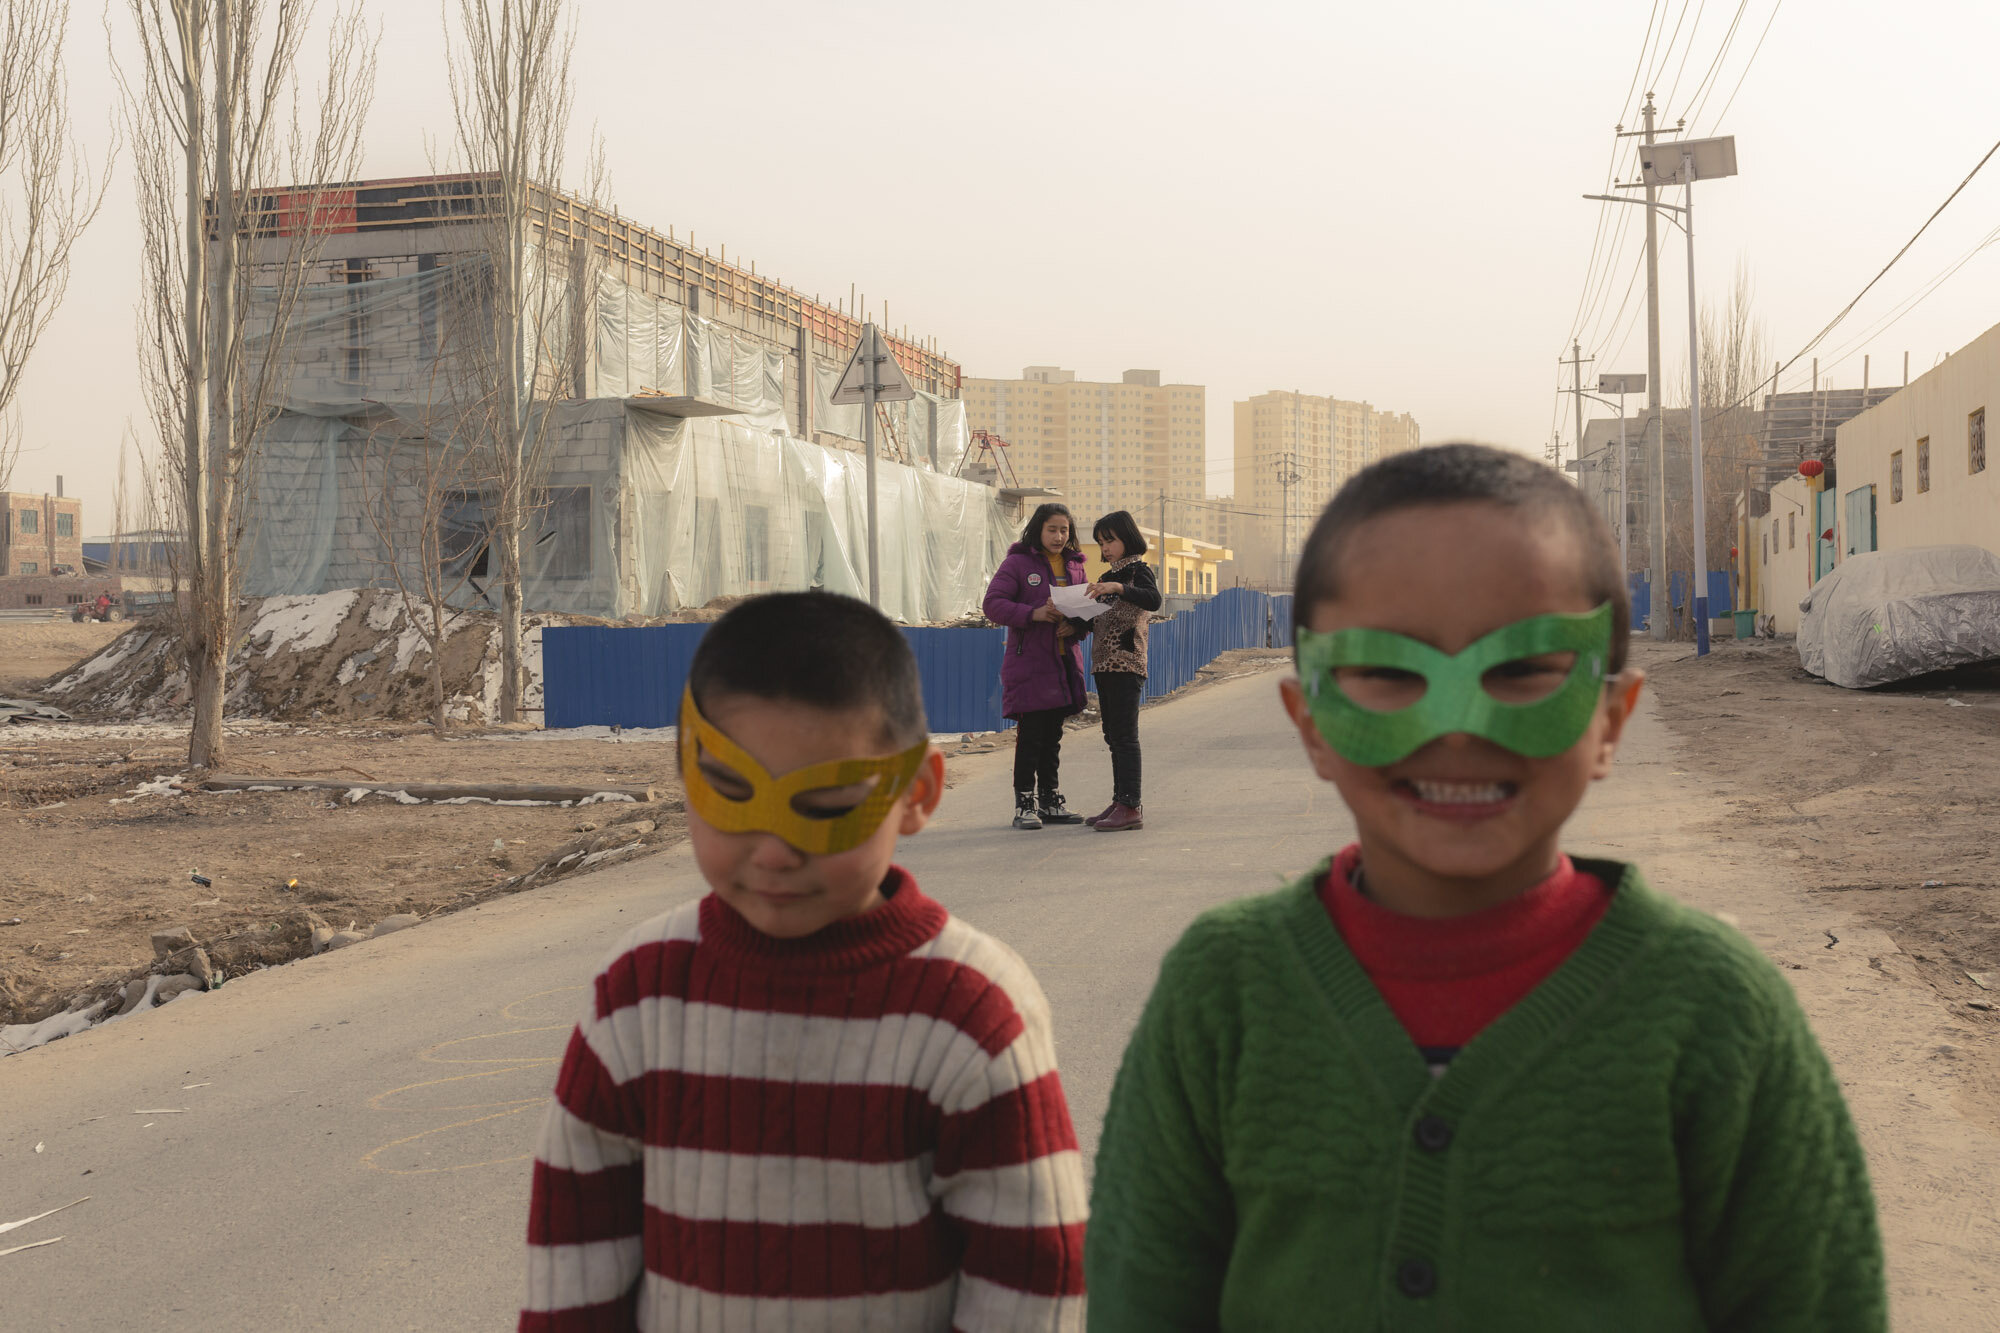  February 2nd 2019. Hotan, Xinjiang province. Uighur-minority kids playing in the streets of what remains of the old town. 